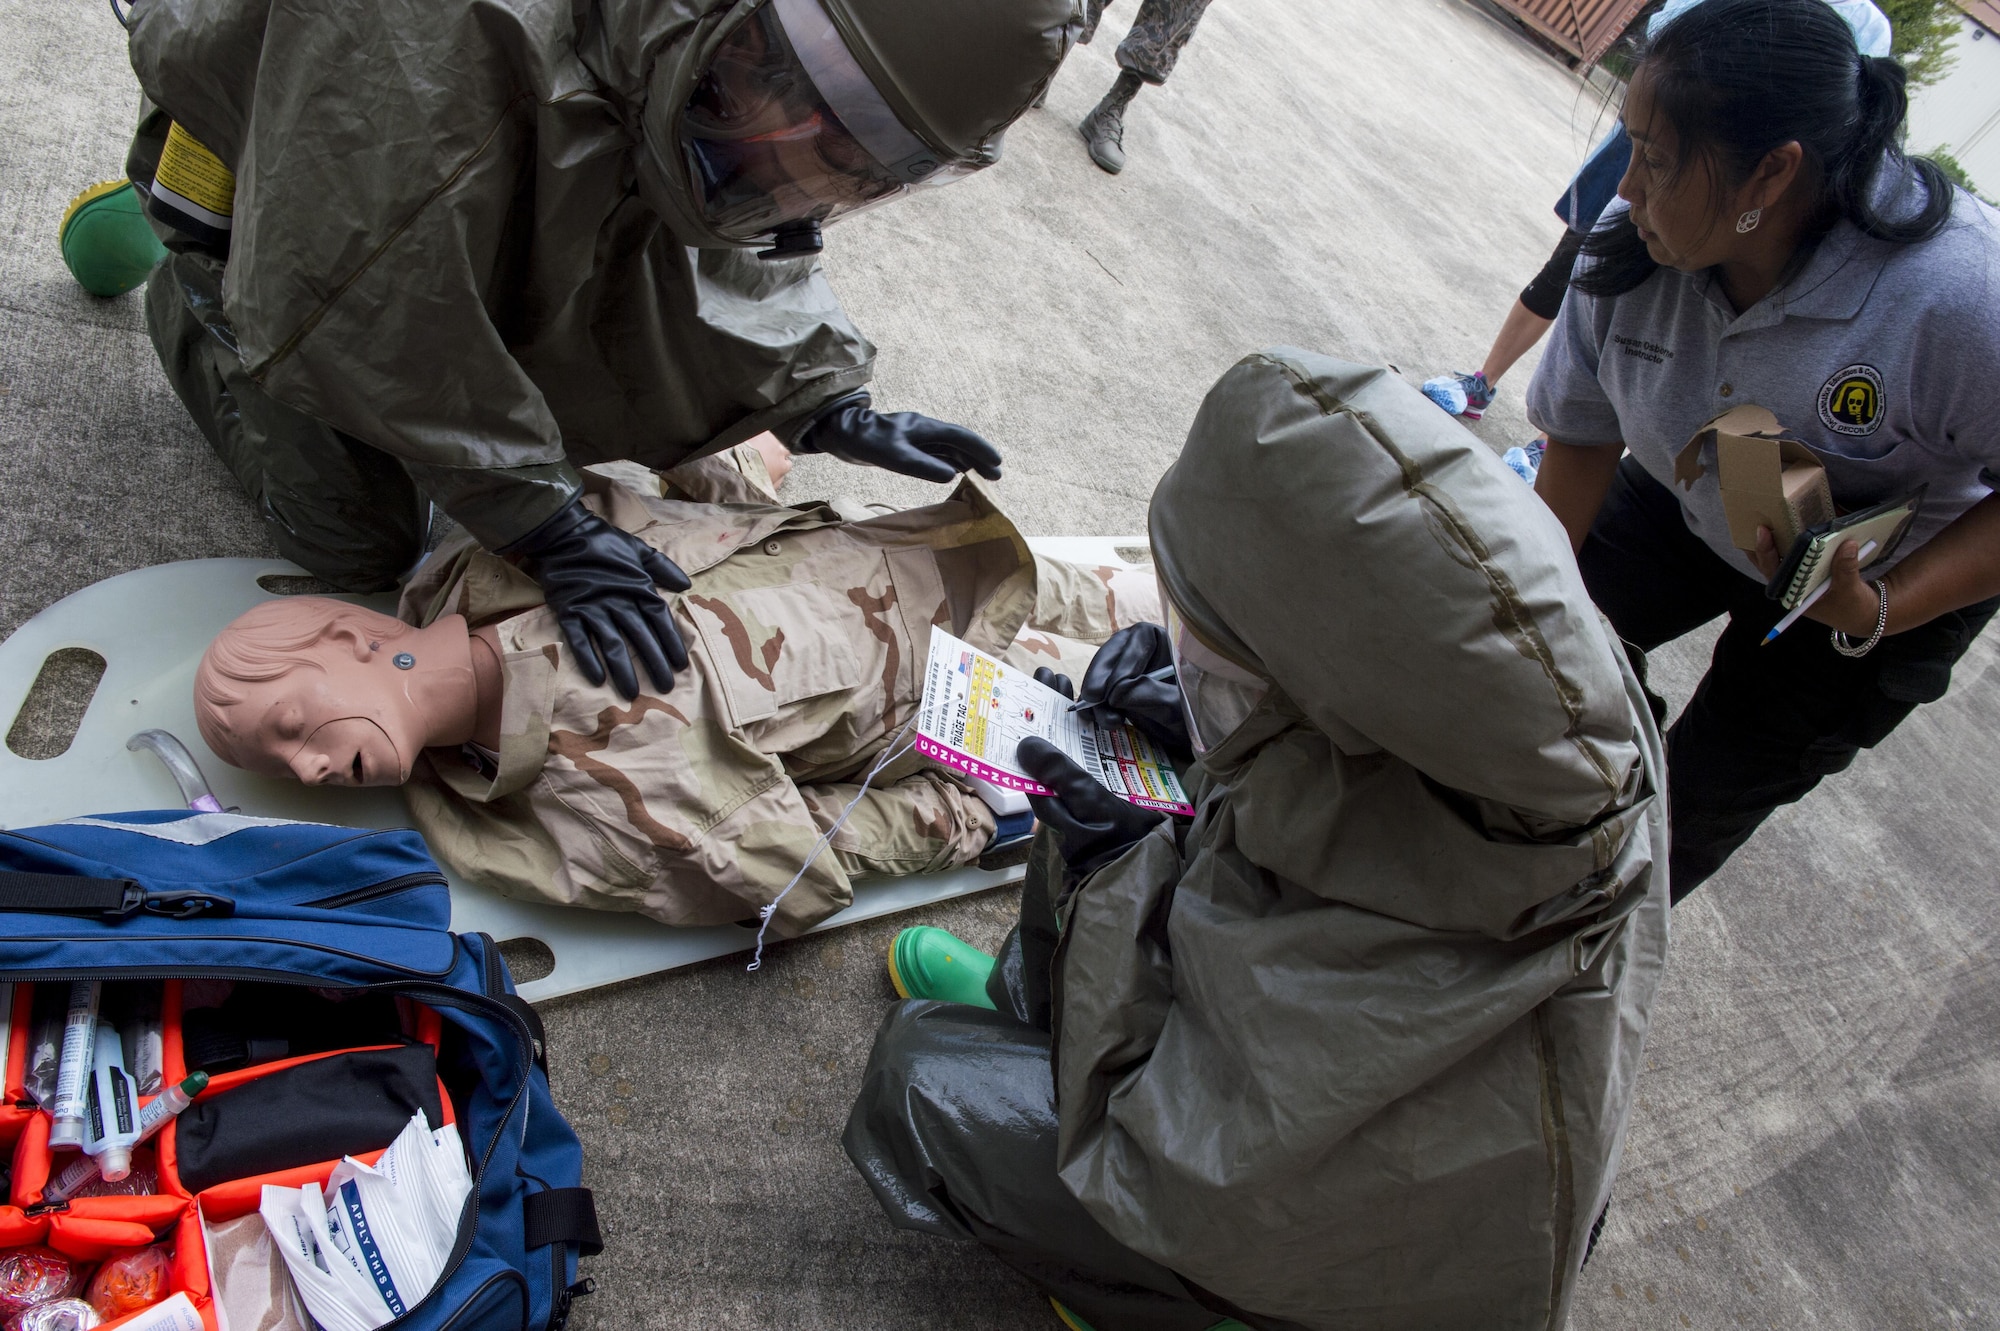 Susan Osborne, certified Decon L.L.C. instructor observes 628th Medical Group members during a patient decontamination drill here Sept. 15, 2016. The goal of the drill was to train participants in Hazardous Waste Operations. Once completed, the team is capable of recertifying other members of the In Place Patient Decontamination team.